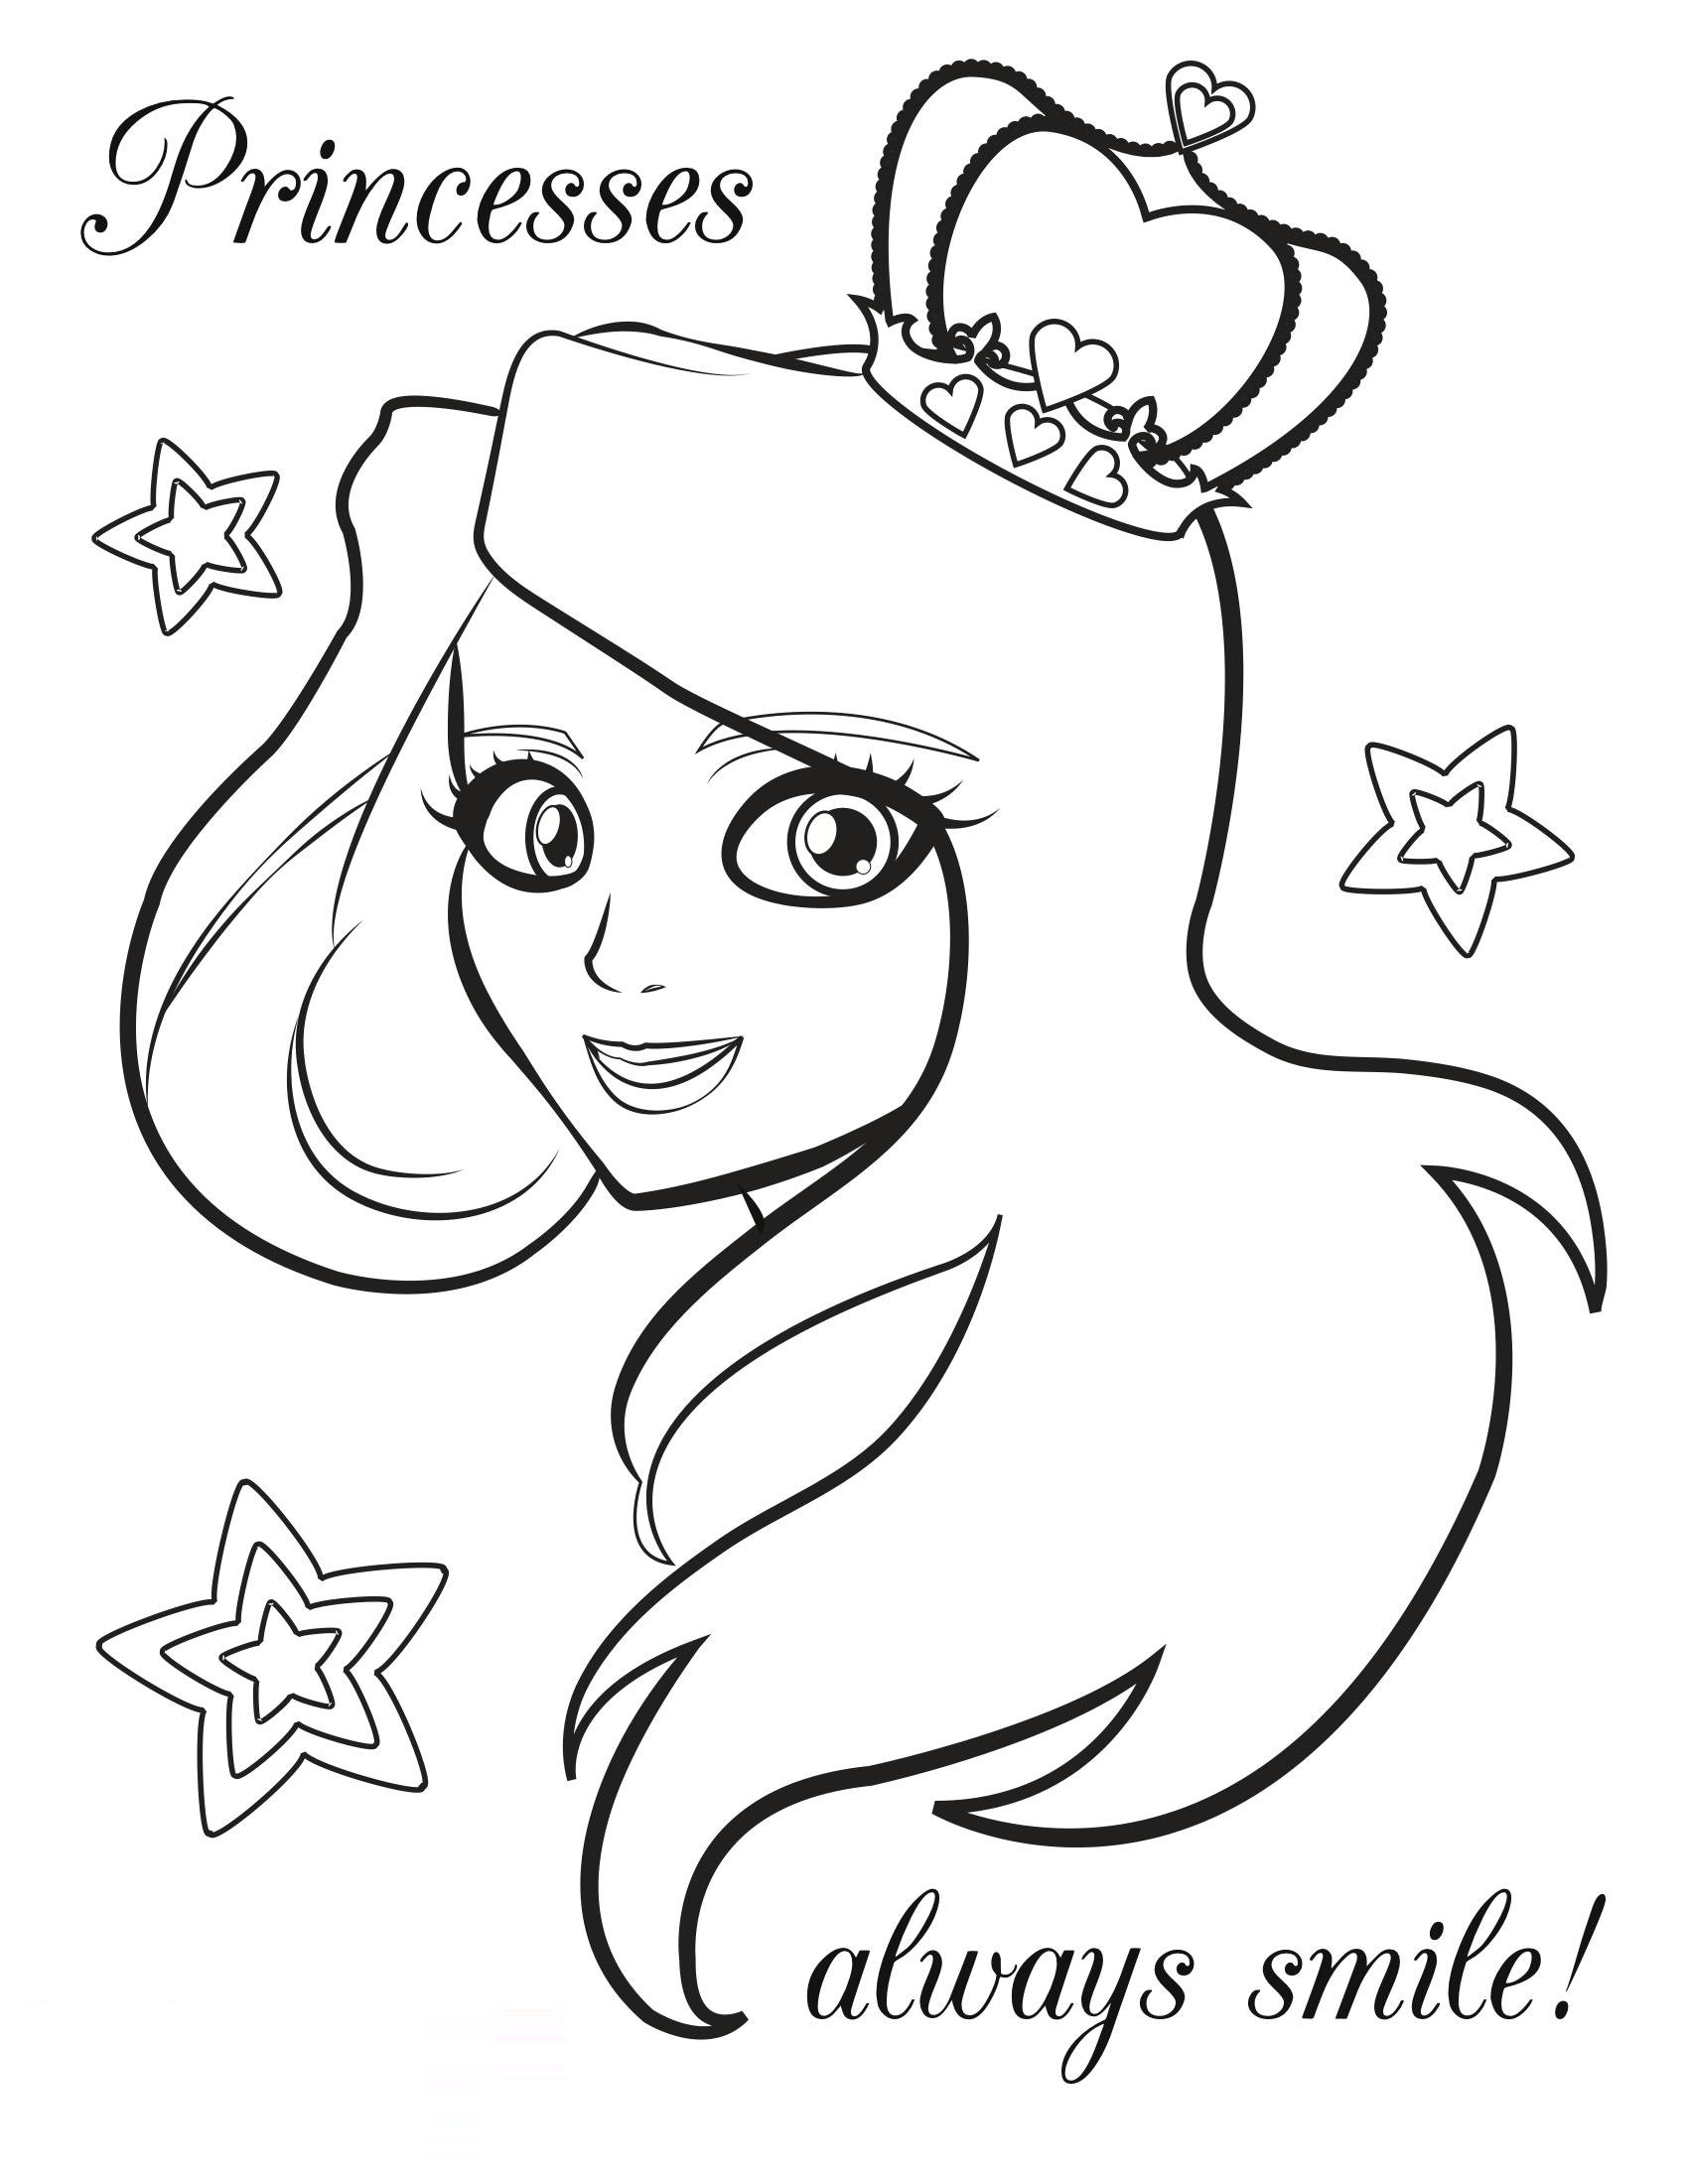 Printable Princess Coloring Pages For Girls
 2014 free coloring pages of princess to print for girls